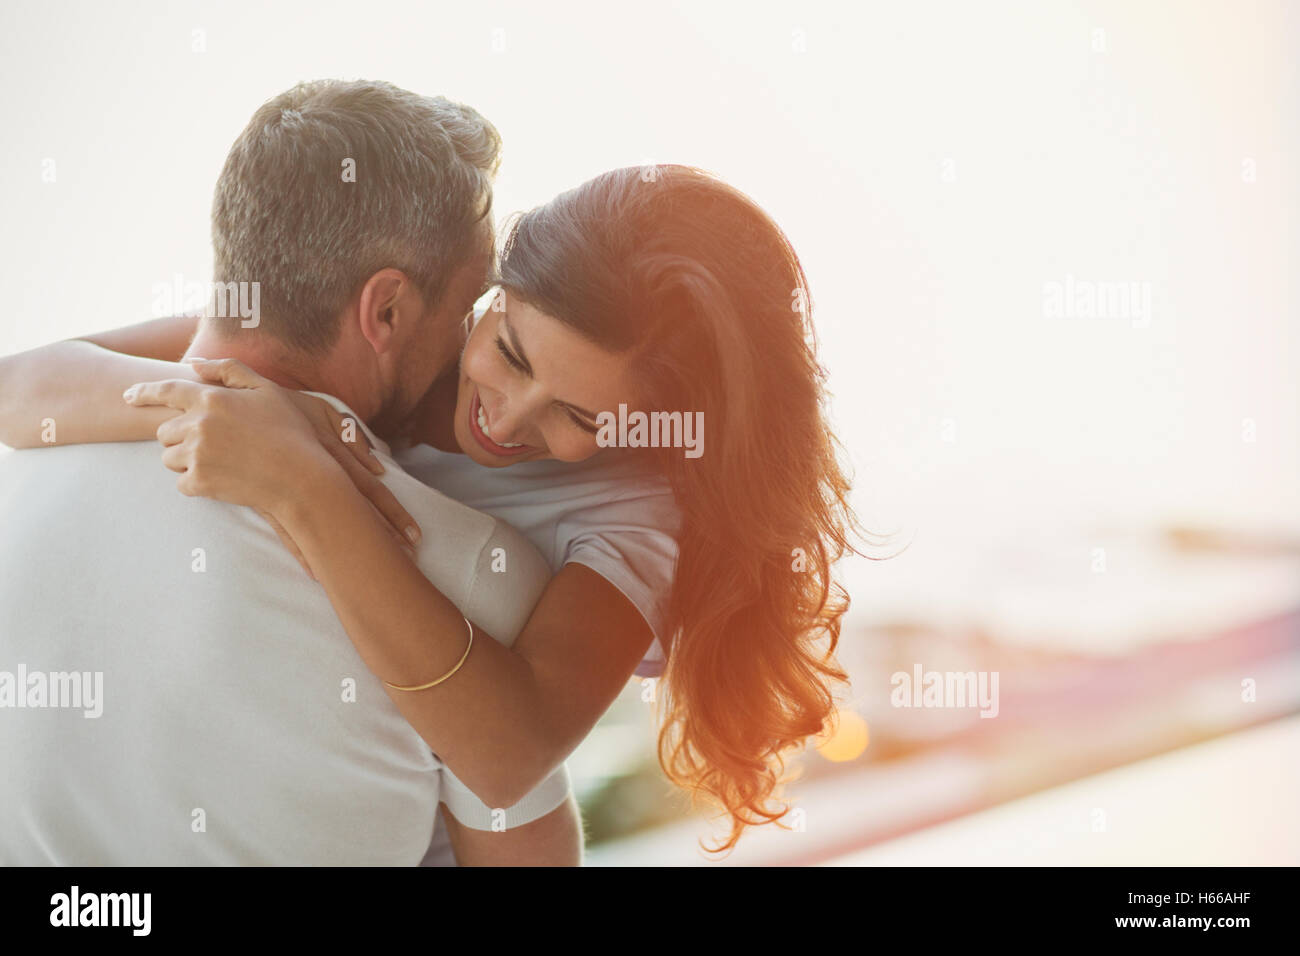 Affectionate couple hugging Stock Photo